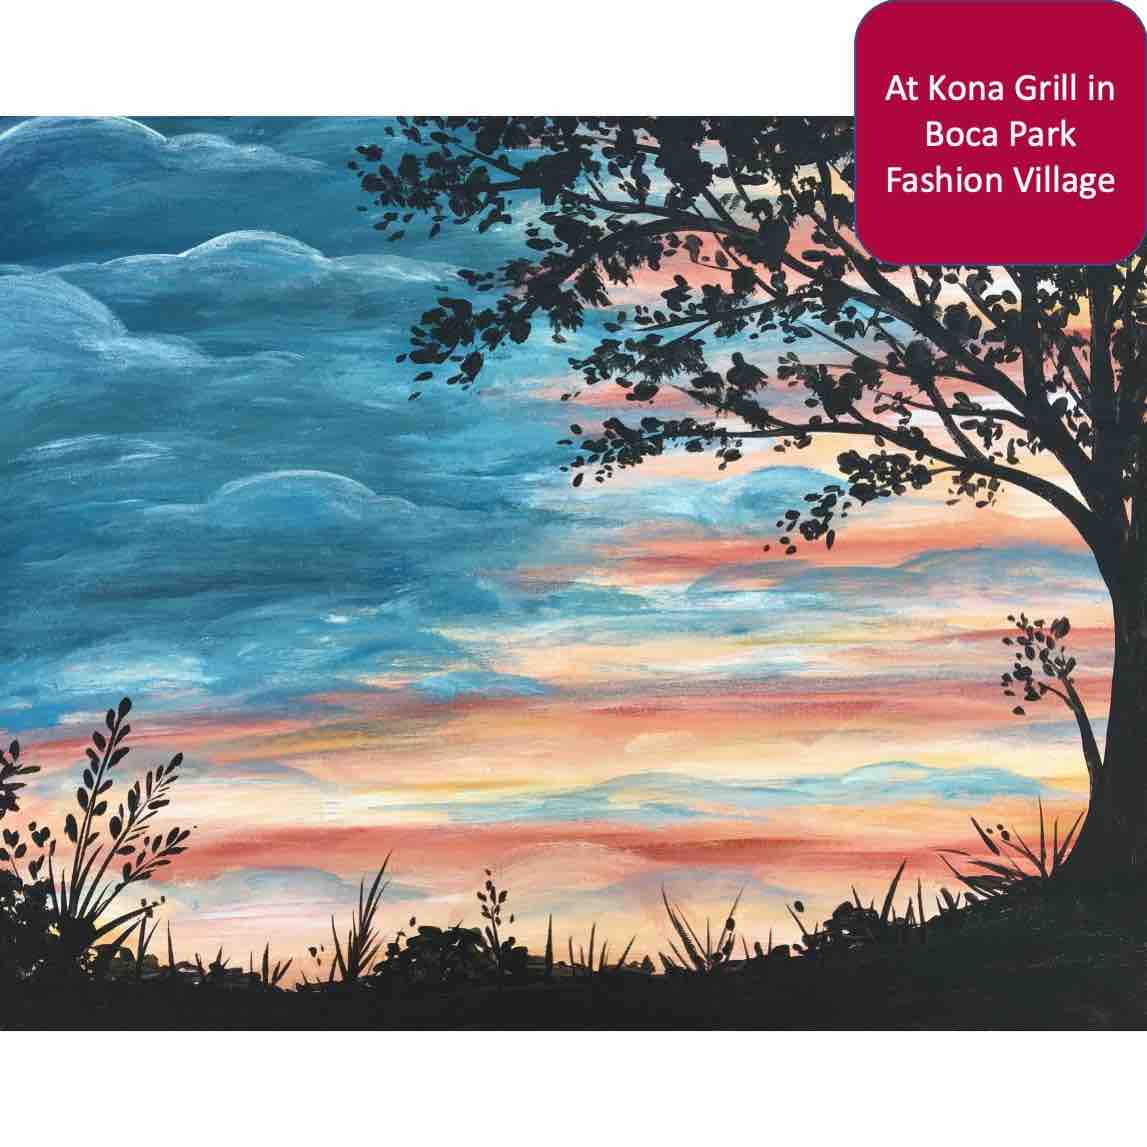 Paint with us at Kona Grill!